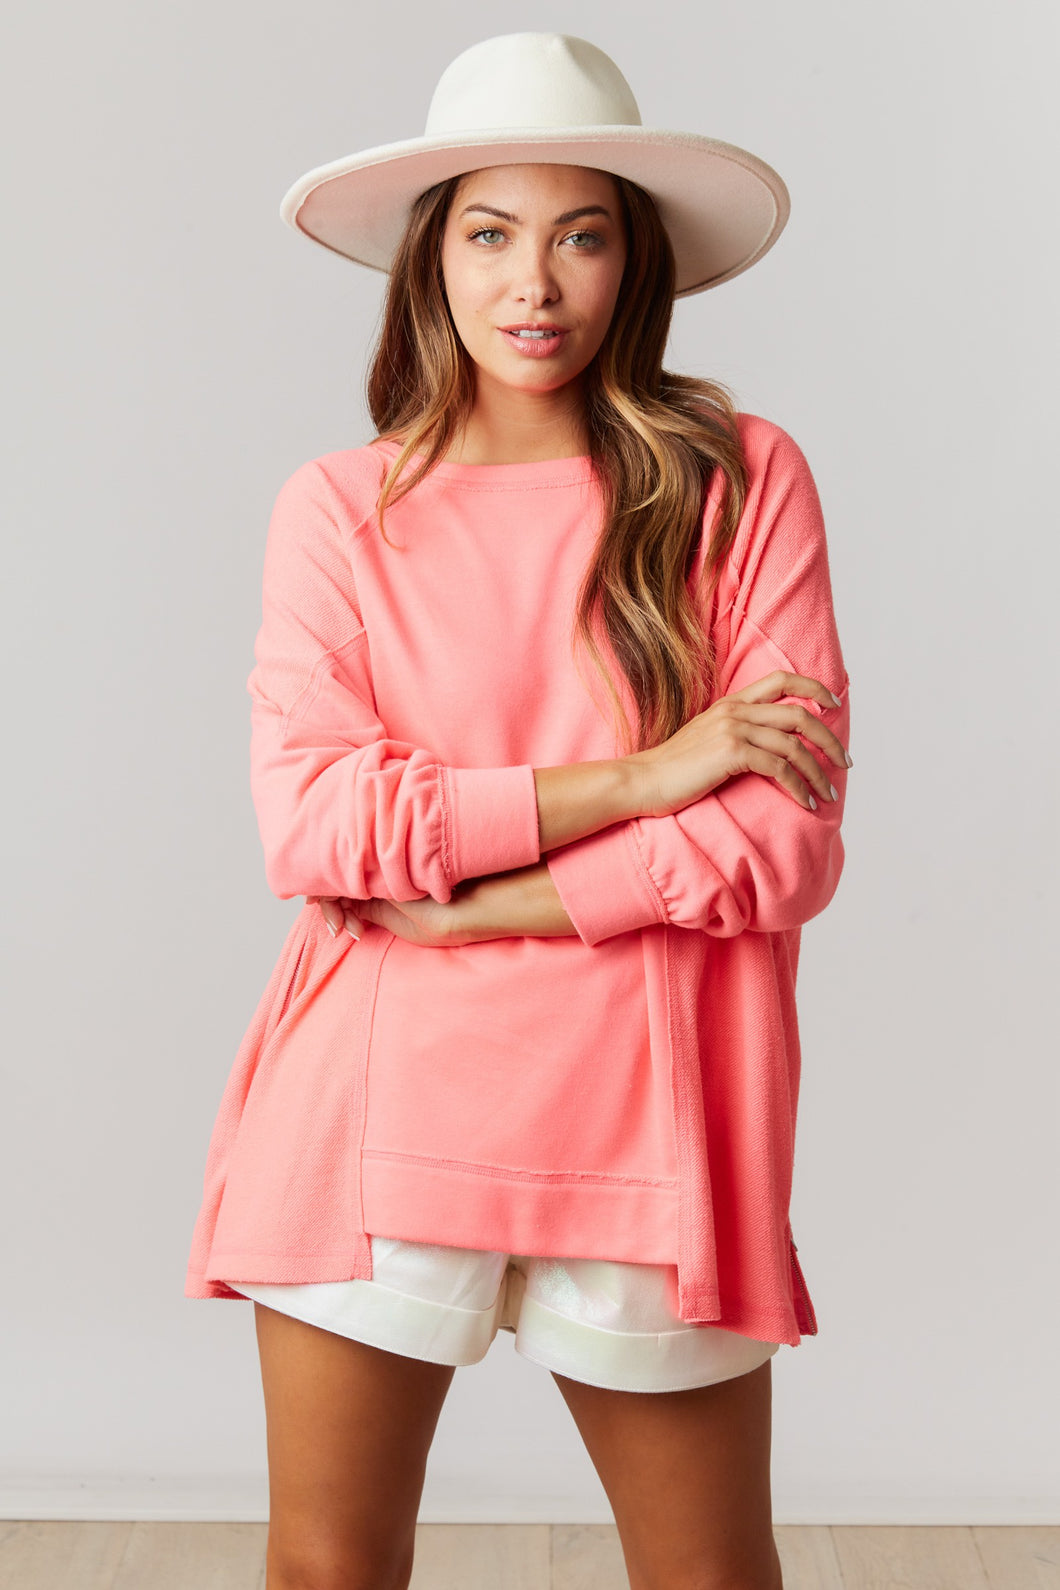 Fantastic Fawn Pull Over With Side Zipper Details in Neon Pink Shirts & Tops Fantastic Fawn   